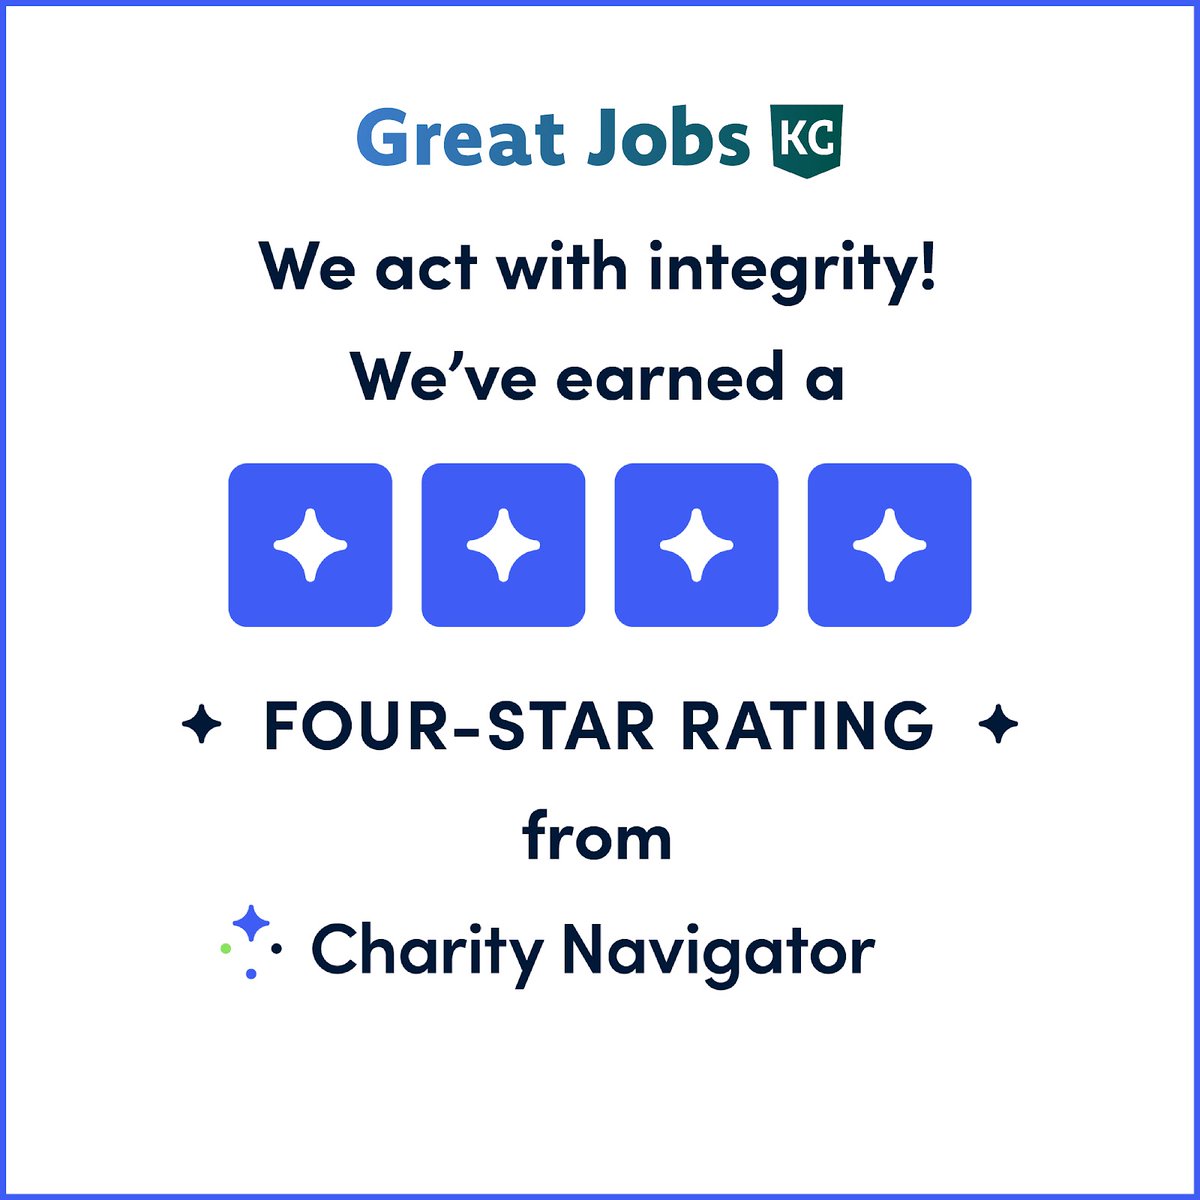 Great Jobs KC is now a 4-star charity on Charity Navigator! Thank you to everyone who has been an integral part of our mission!